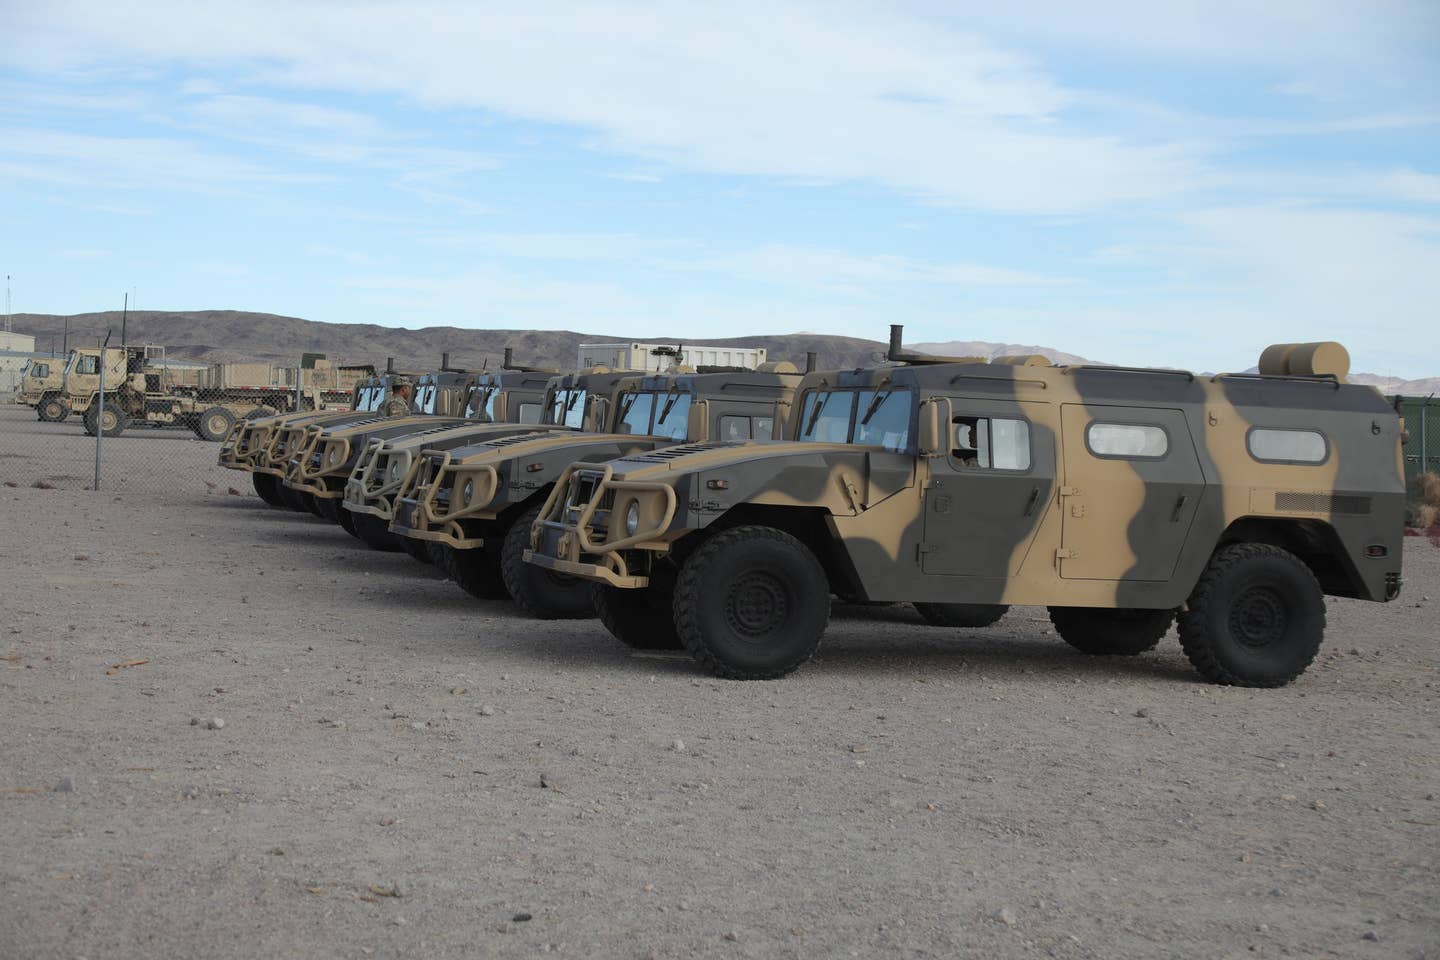 An Army Humvee-type vehicle being used to emulate a Russian GAZ Tigr. <em>Credit: 11th Armored Cavalry Regiment</em>